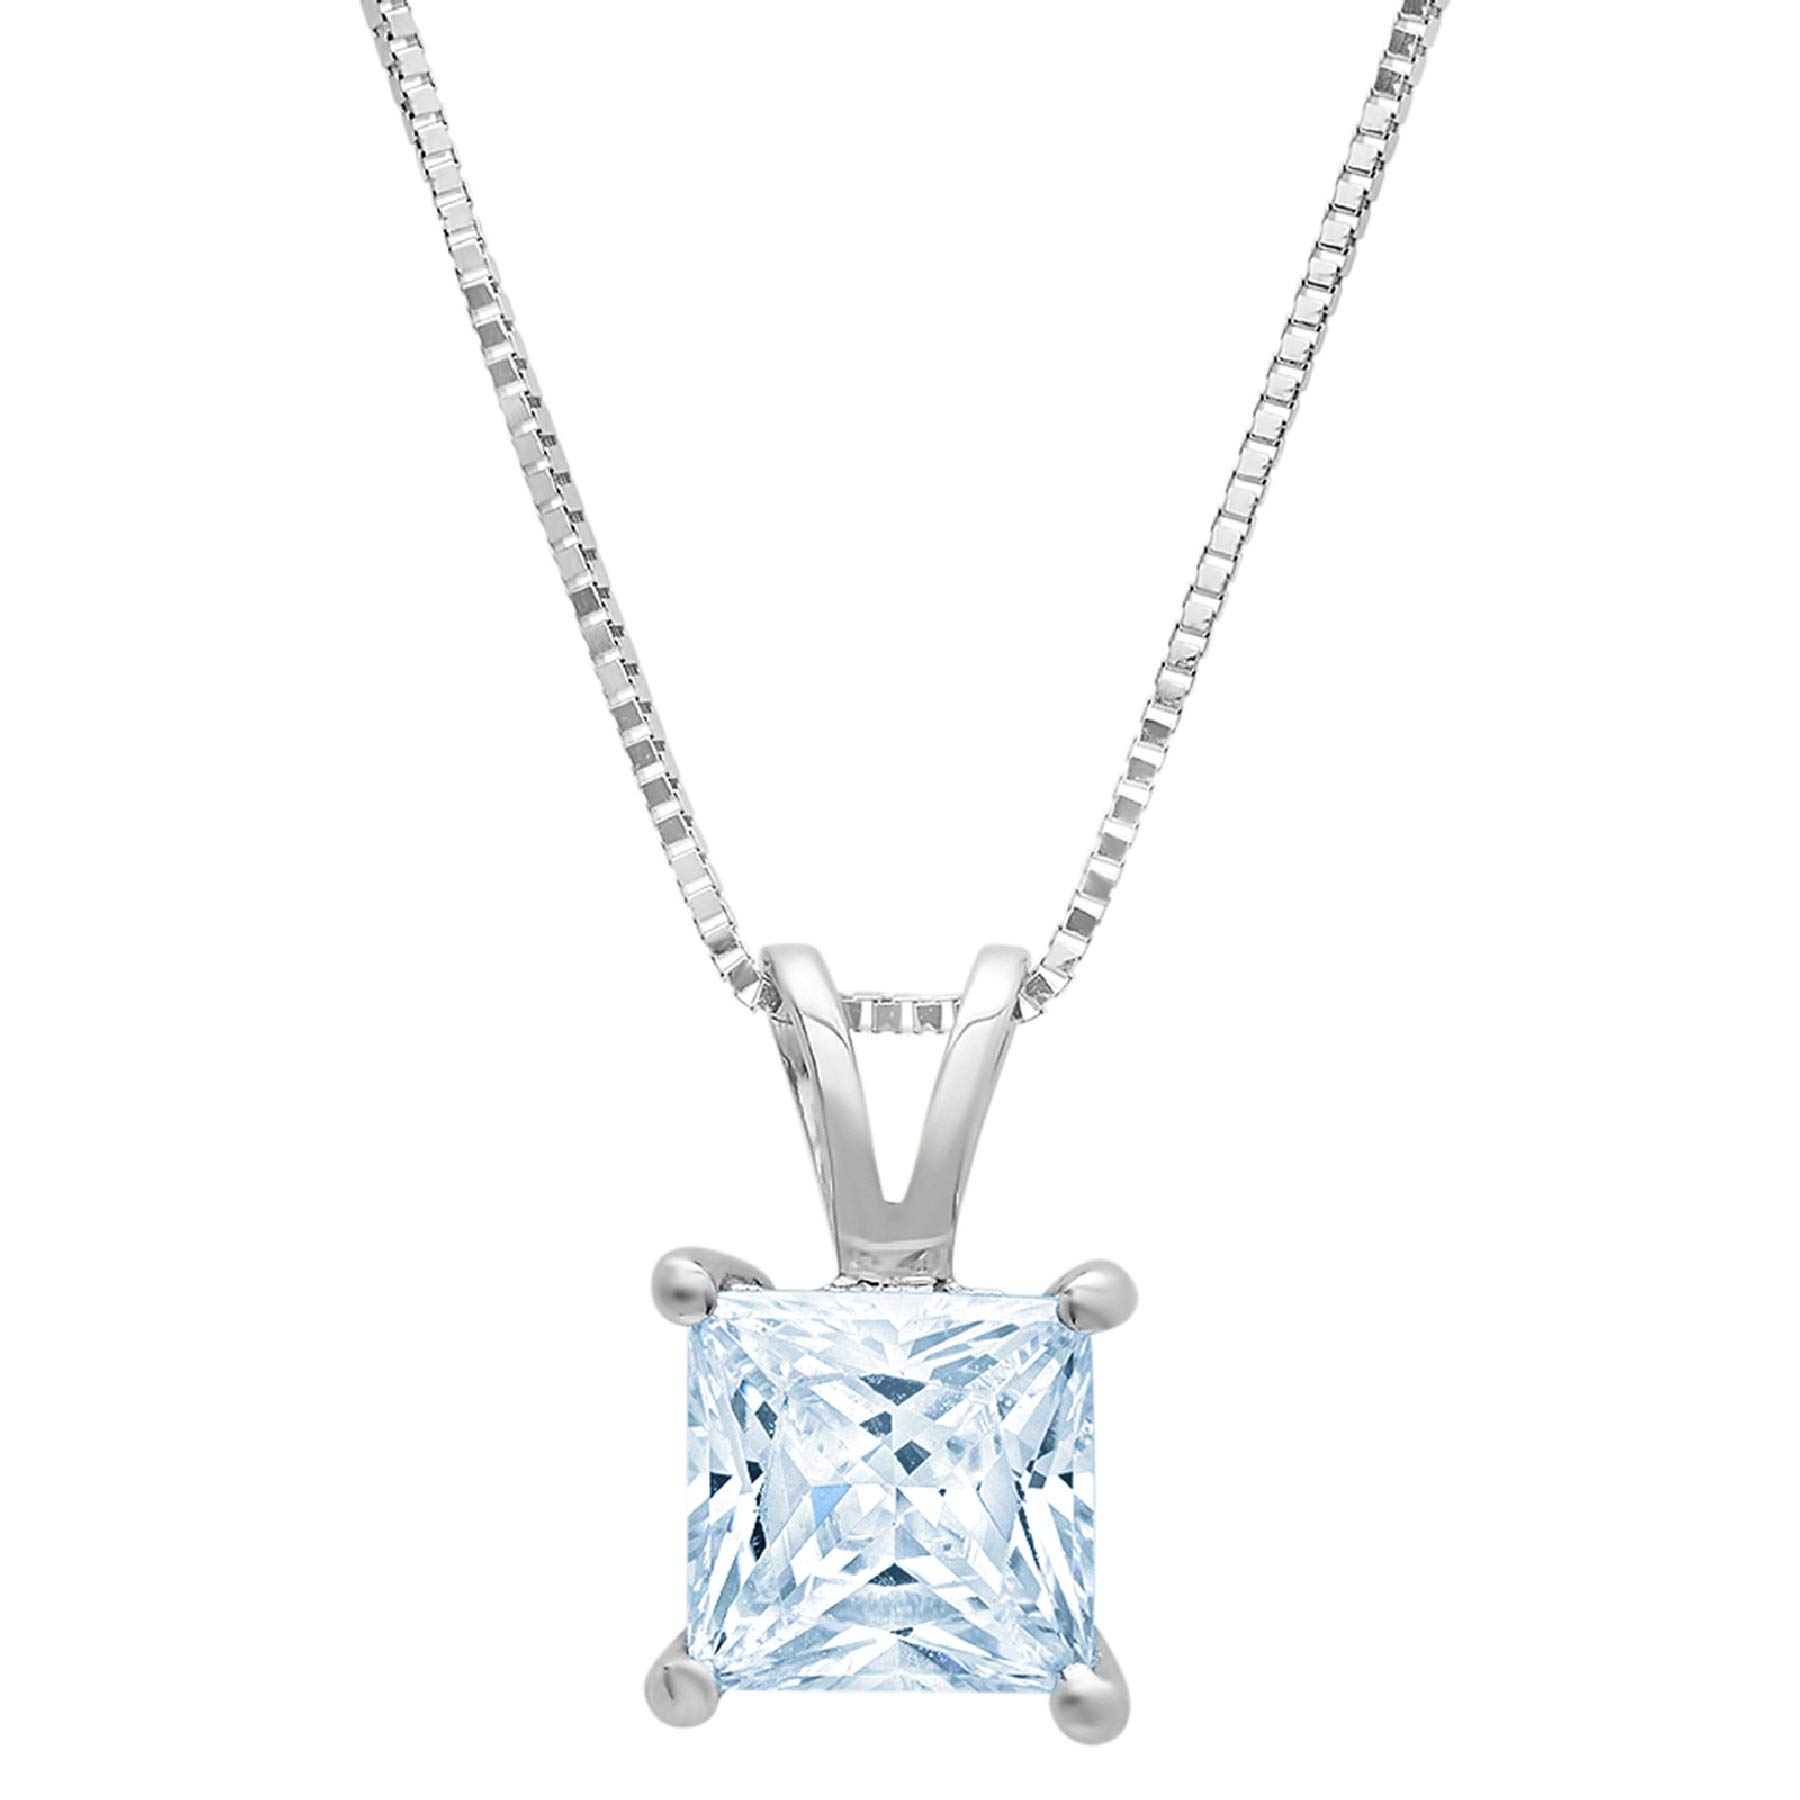 Clara Pucci 3.0 ct Brilliant Princess Cut Stunning Genuine Flawless Blue Simulated Diamond Gemstone Solitaire Pendant Necklace With 16